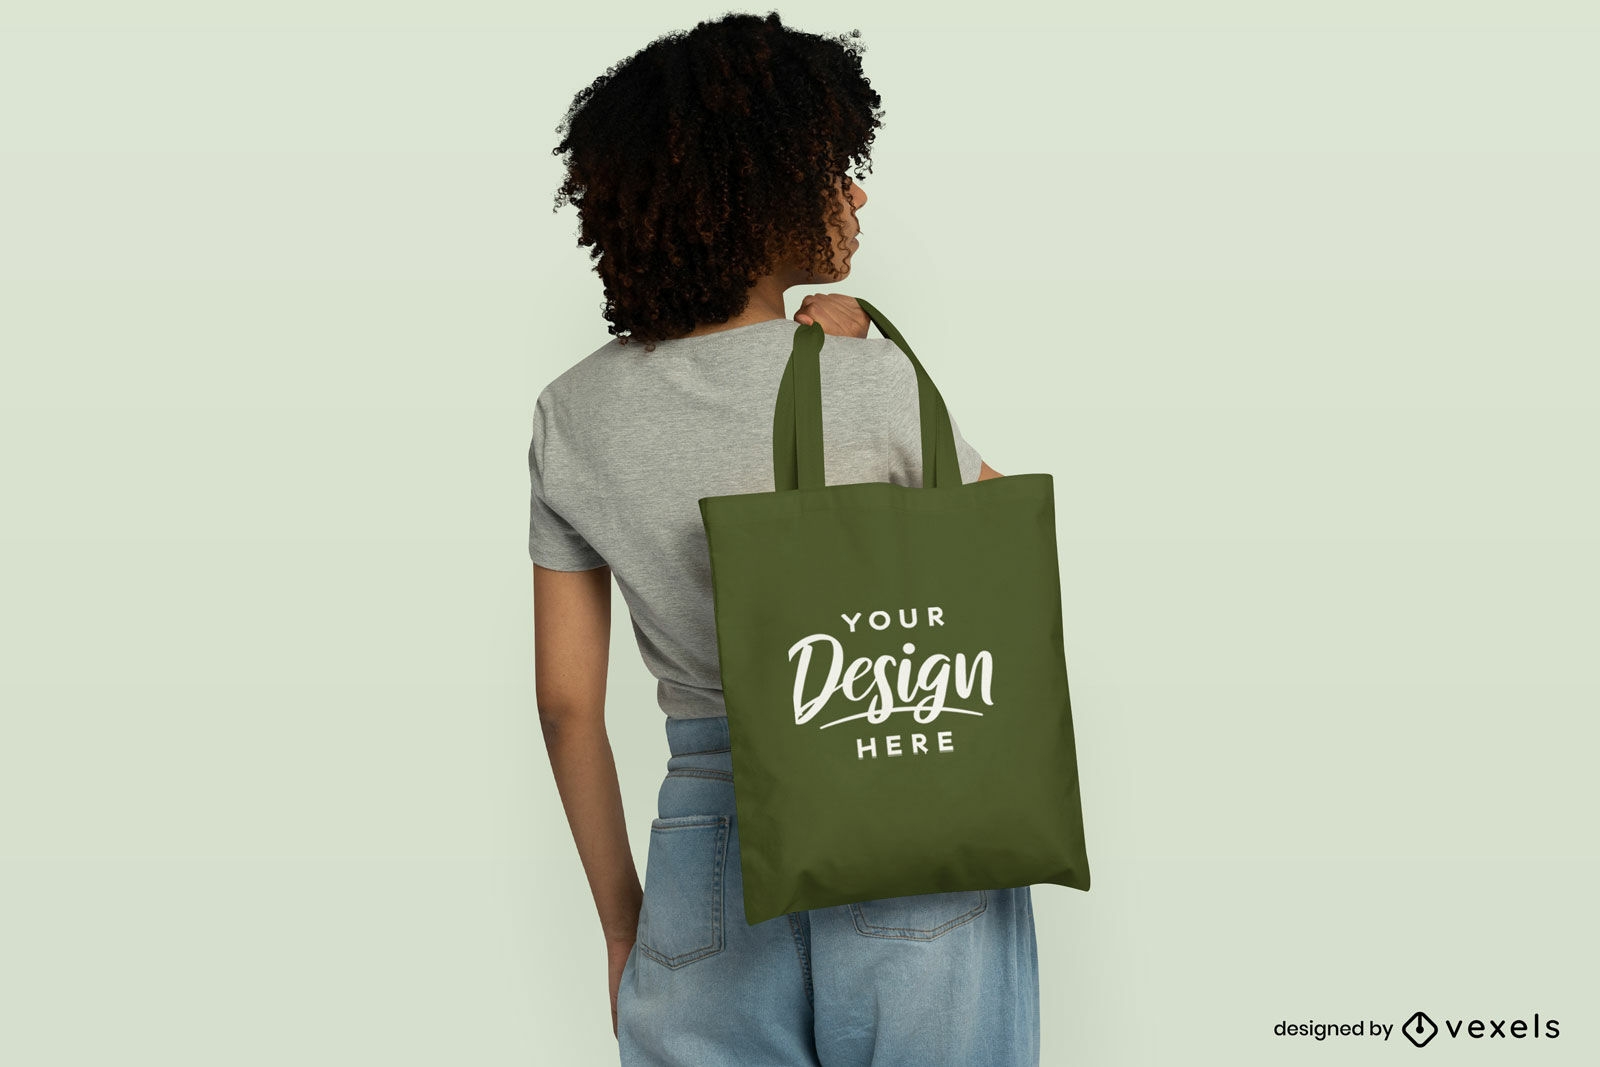 Black girl with curly hair and tote bag mockup